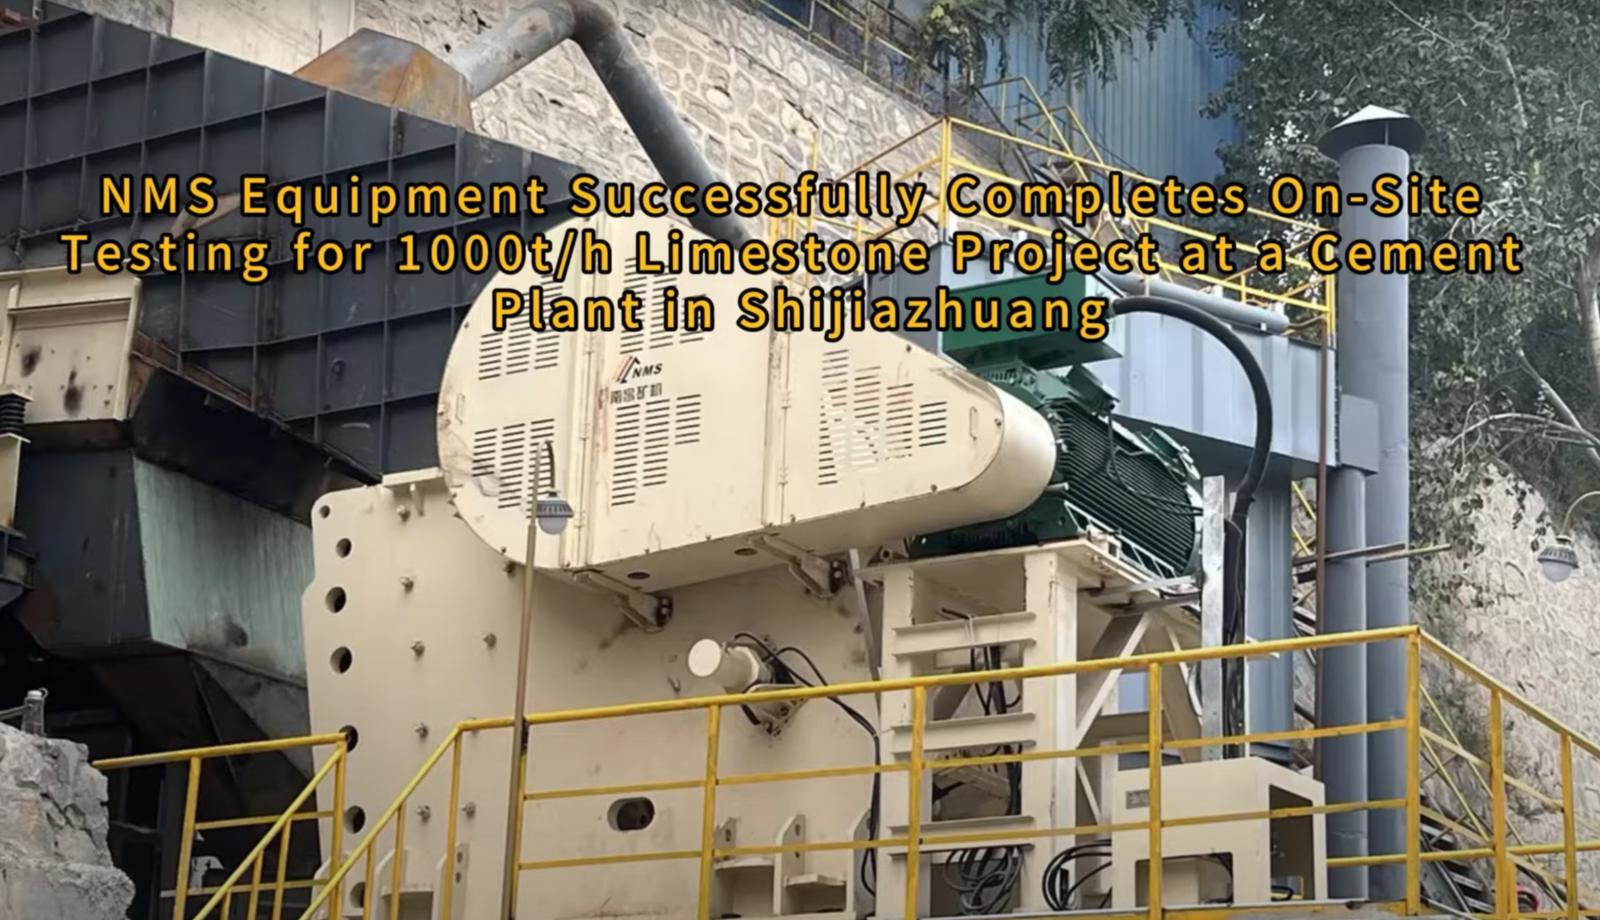 NMS Equipment Successfully Completes On-Site Testing for 1000t/h Limestone Project at a Cement Plant in Shijiazhuang